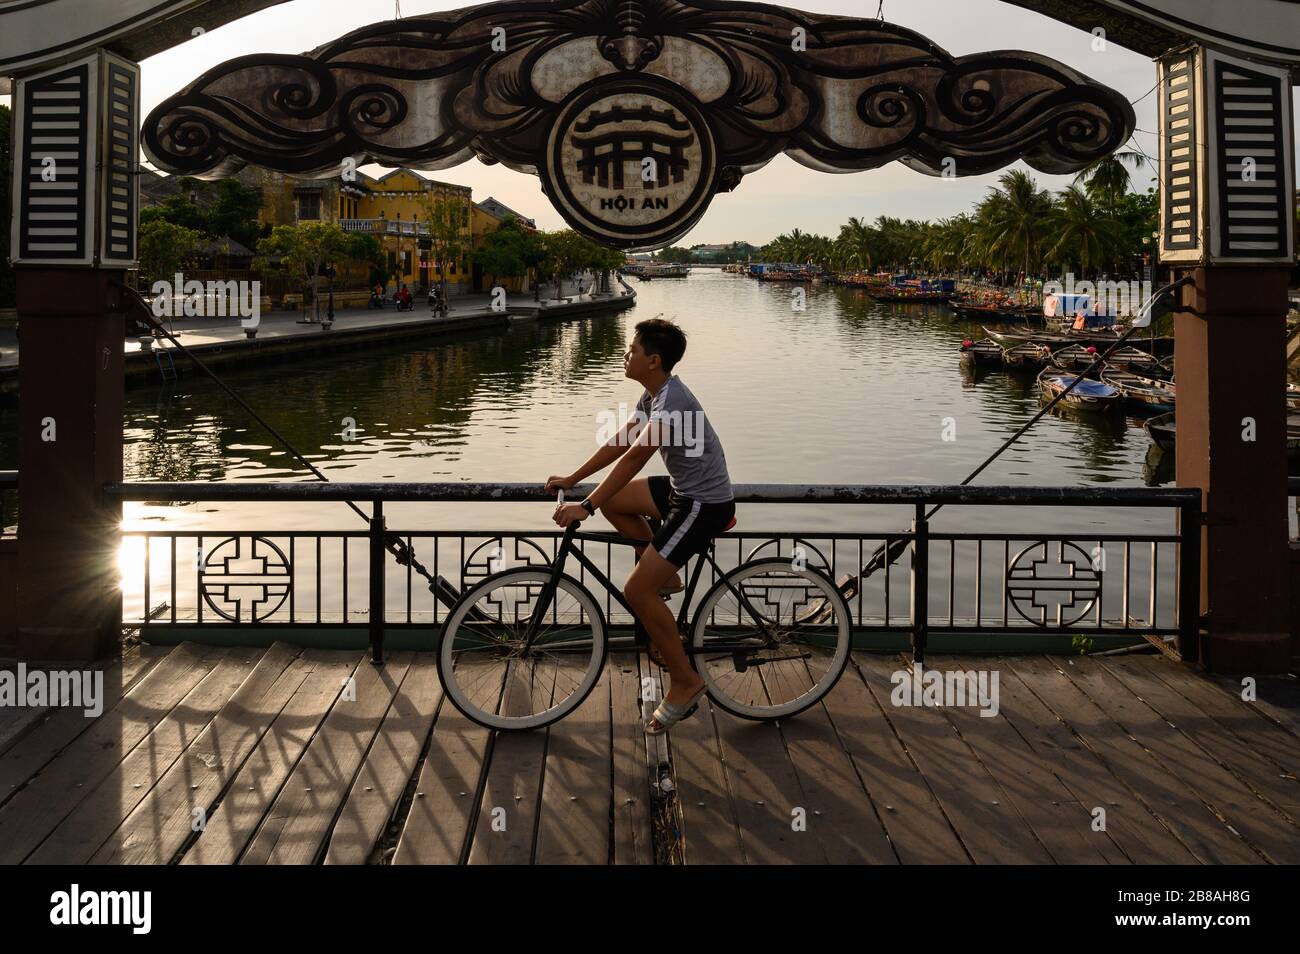 Cyclist riding over the Japanese Covered Bridge, Hoi An, Vietnam Stock Photo